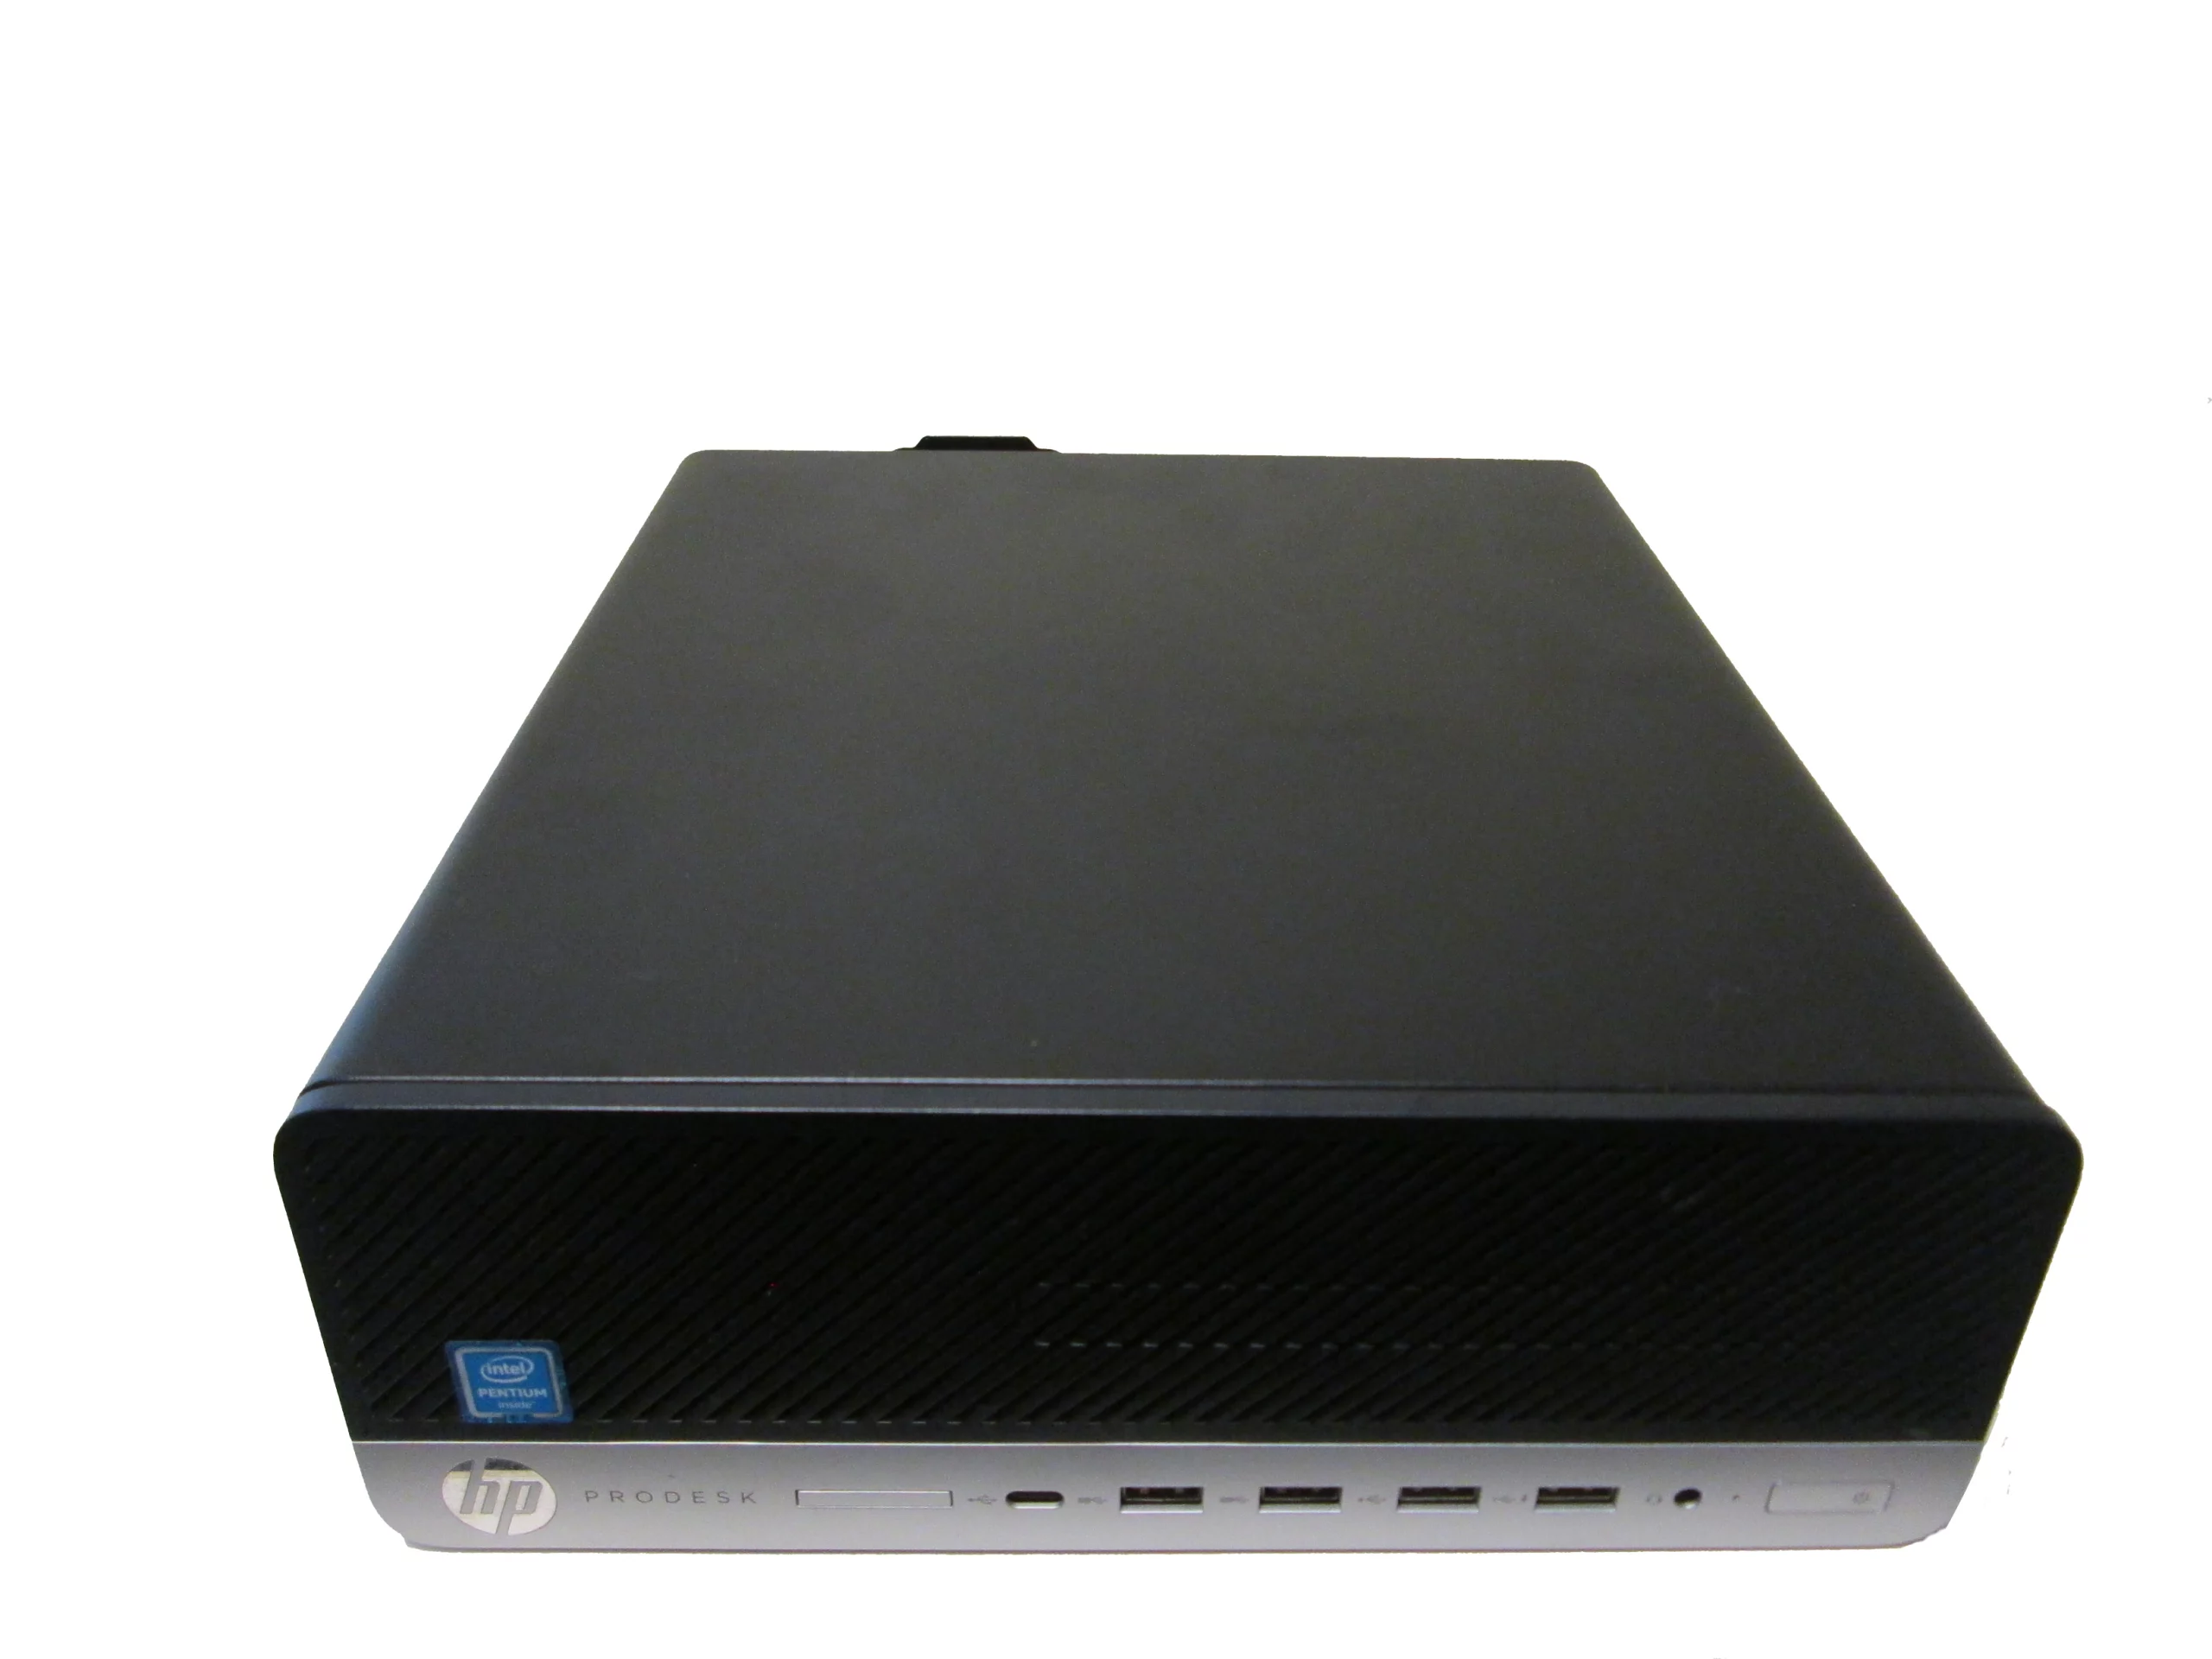 HP ProDesk 600 G3 SFF Computer - Fast Free Shipping!